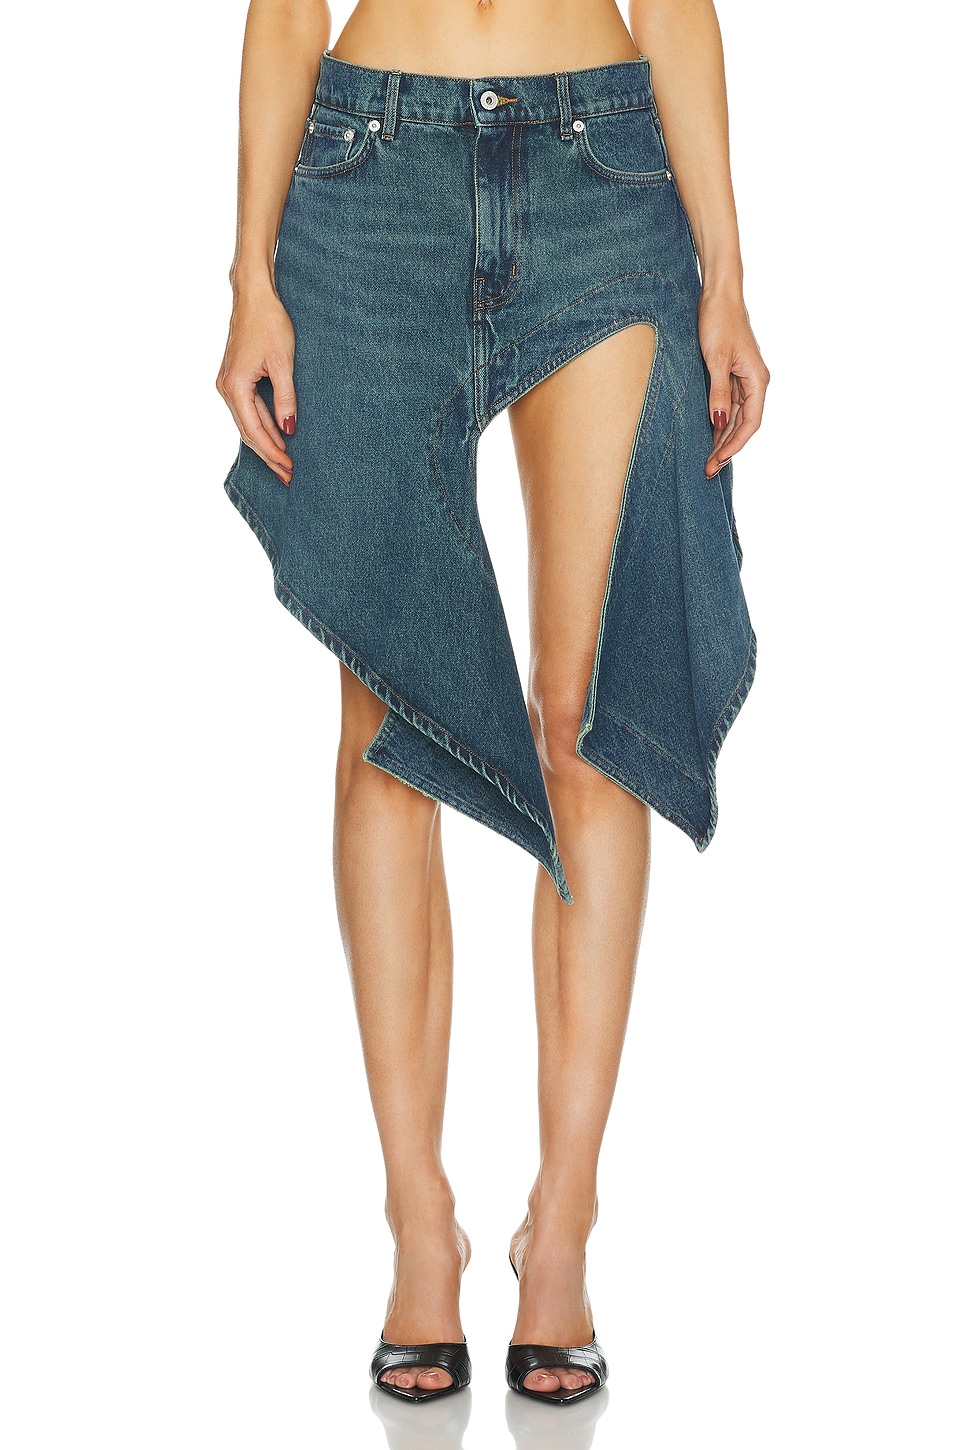 Image 1 of Y/Project Evergreen Cut Out Denim Mini Skirt in Evergreen Vintage Blue